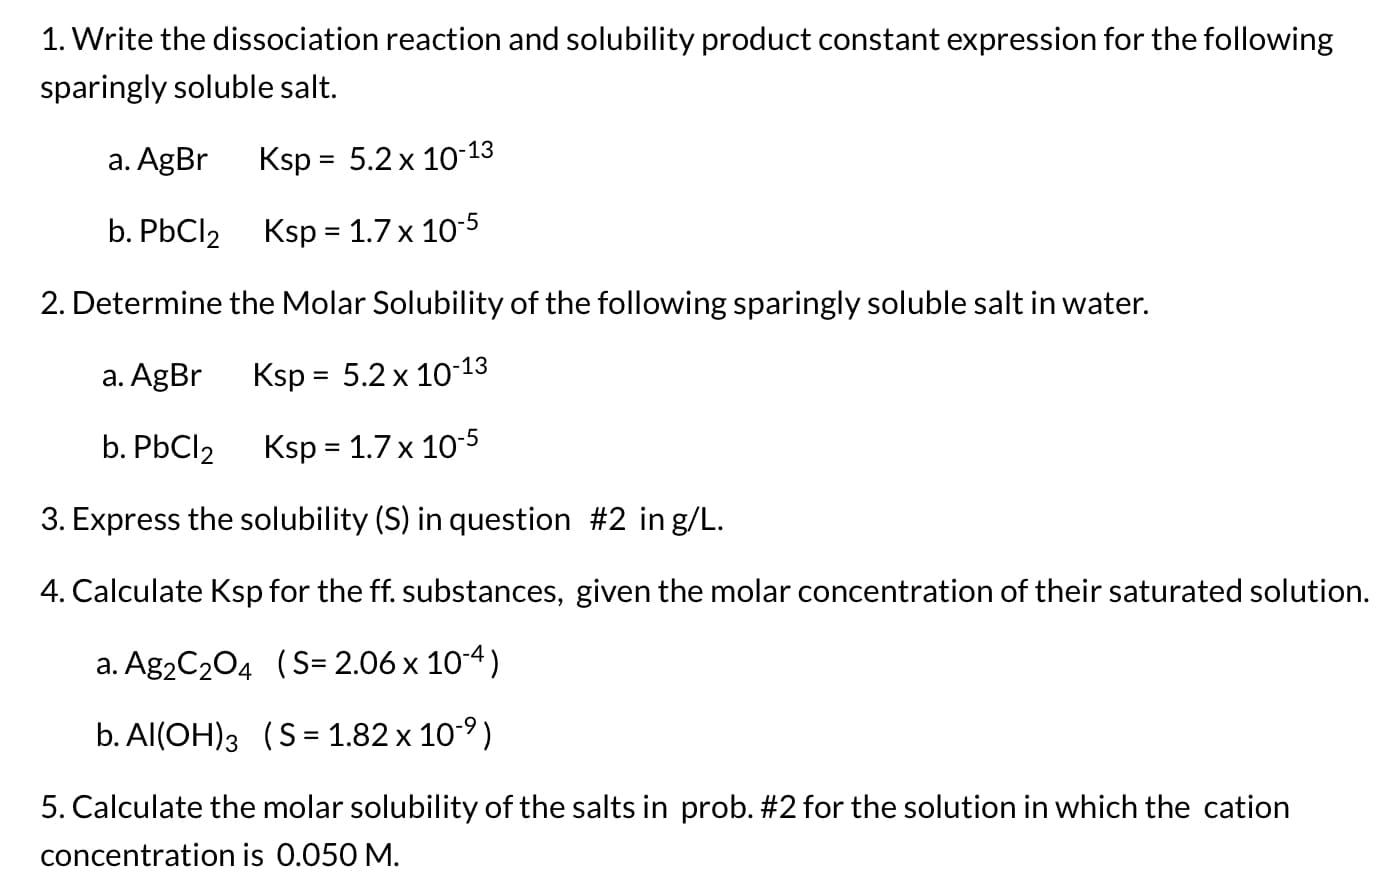 1. Write the dissociation reaction and solubility product constant expression for the following
sparingly soluble salt.
a. AgBr
Ksp = 5.2 x 10-13
b. PbCl2 Ksp = 1.7 x 10-5
%3D
2. Determine the Molar Solubility of the following sparingly soluble salt in water.
a. AgBr
Ksp = 5.2 x 10-13
b. PBCI2
Ksp = 1.7 x 10-5
3. Express the solubility (S) in question #2 in g/L.
